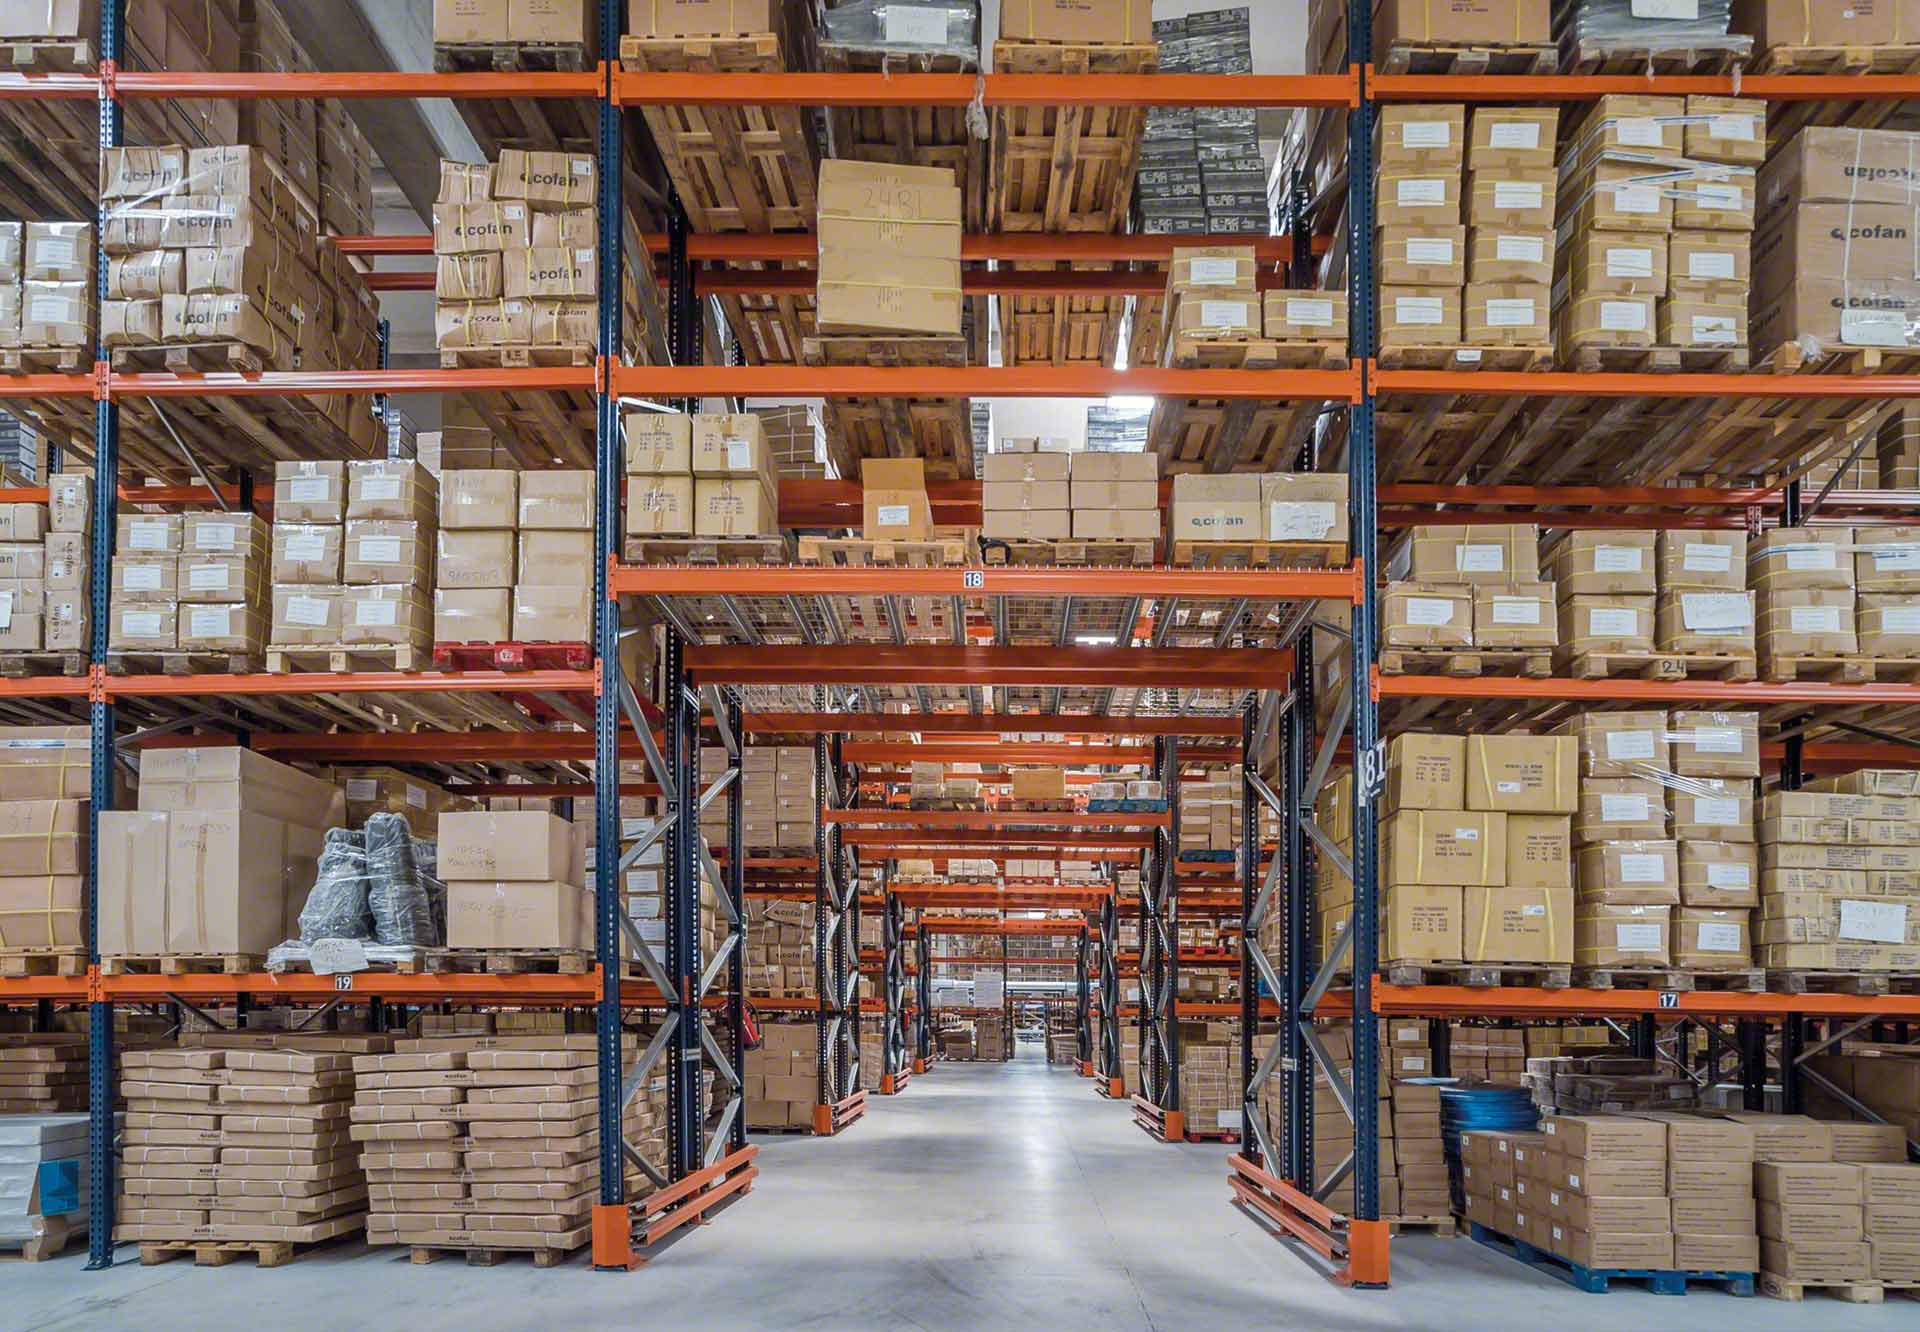 The ABC analysis for classifying goods in the warehouse has considerable advantages